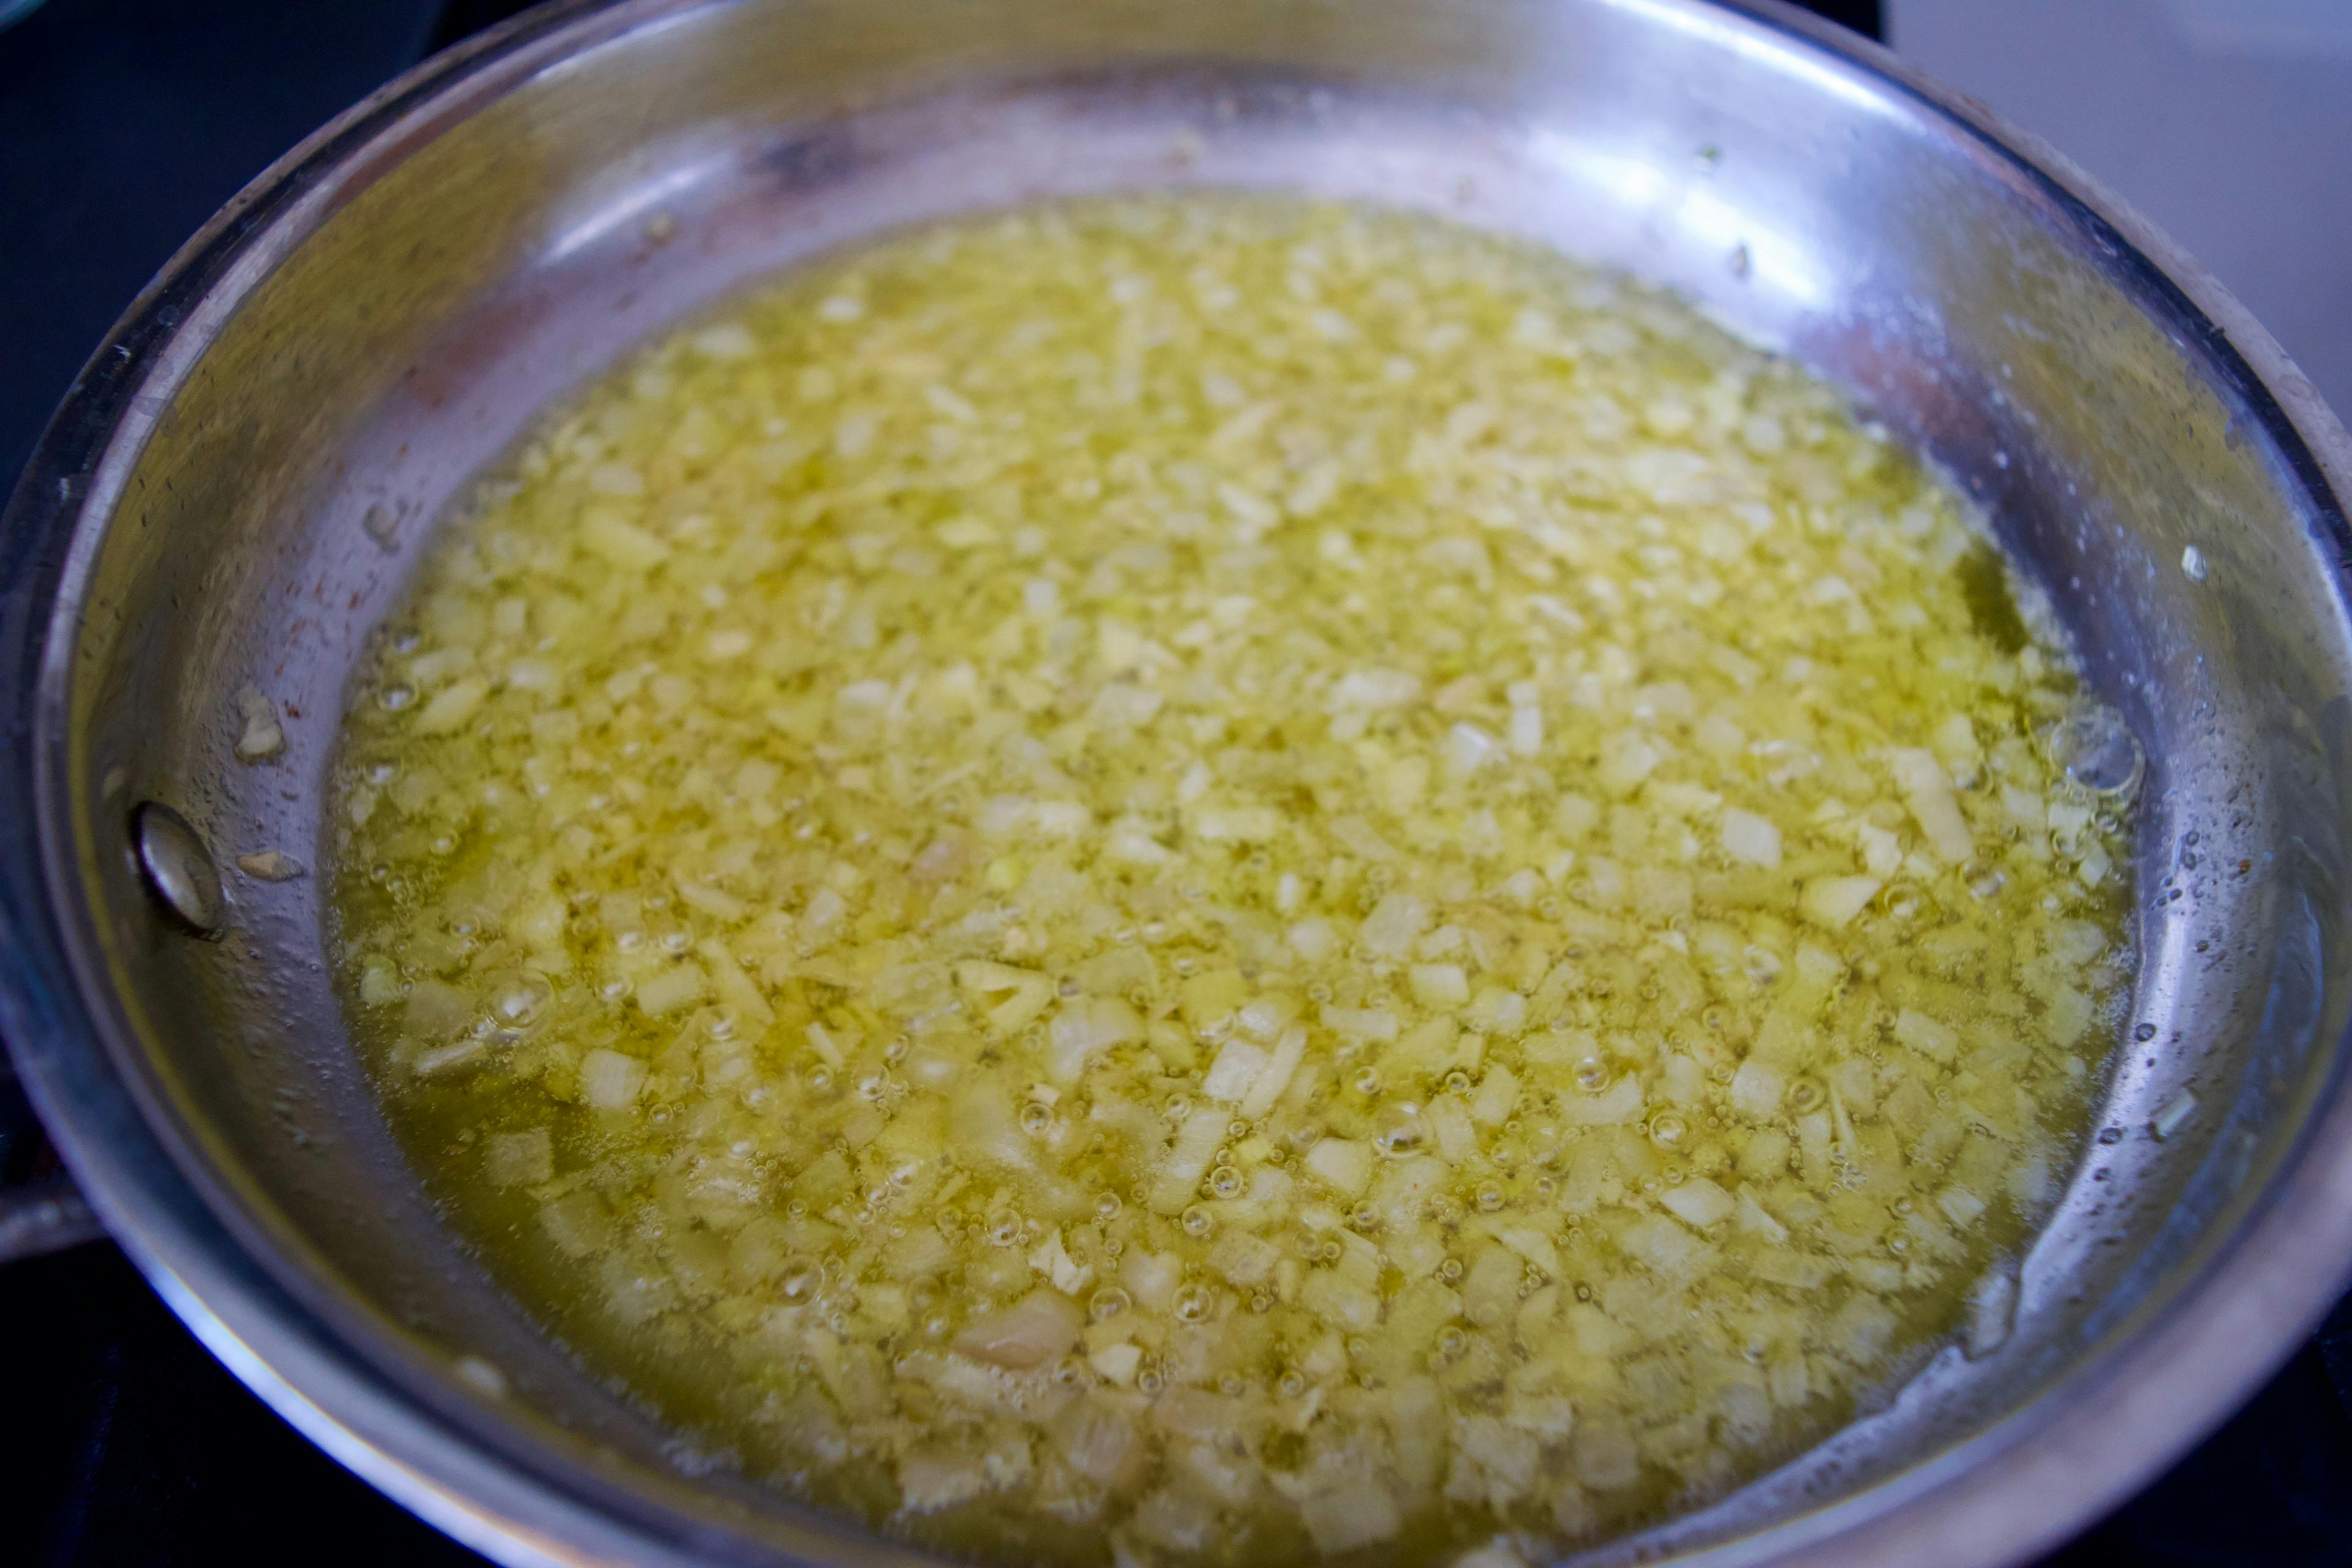 A pan of oil on a stove with minced garlic and shallots poaching. Little bubbles are visible.